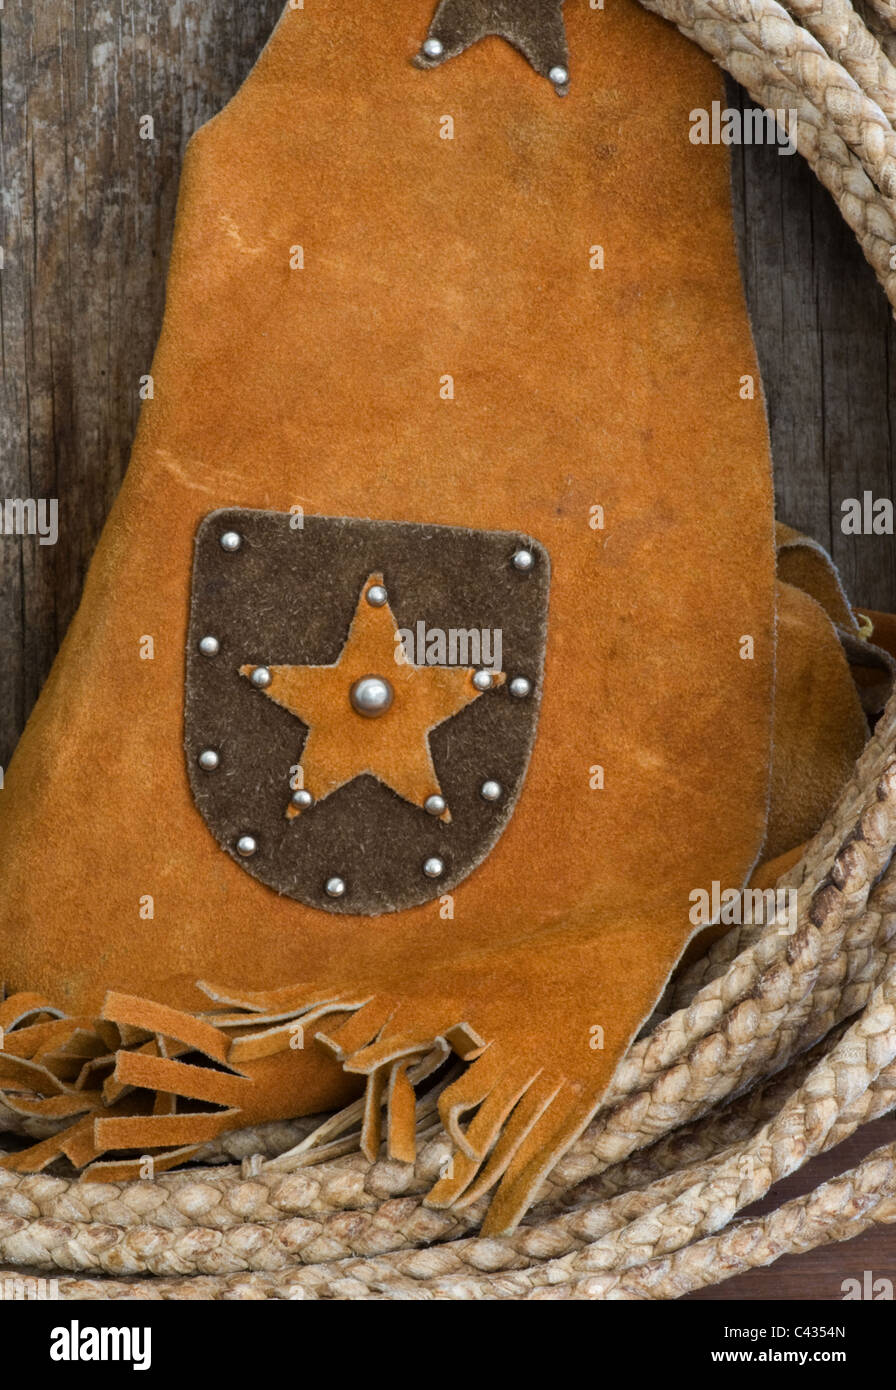 Closeup of western cowboy theme rawhide rope with leather star vest. Stock Photo